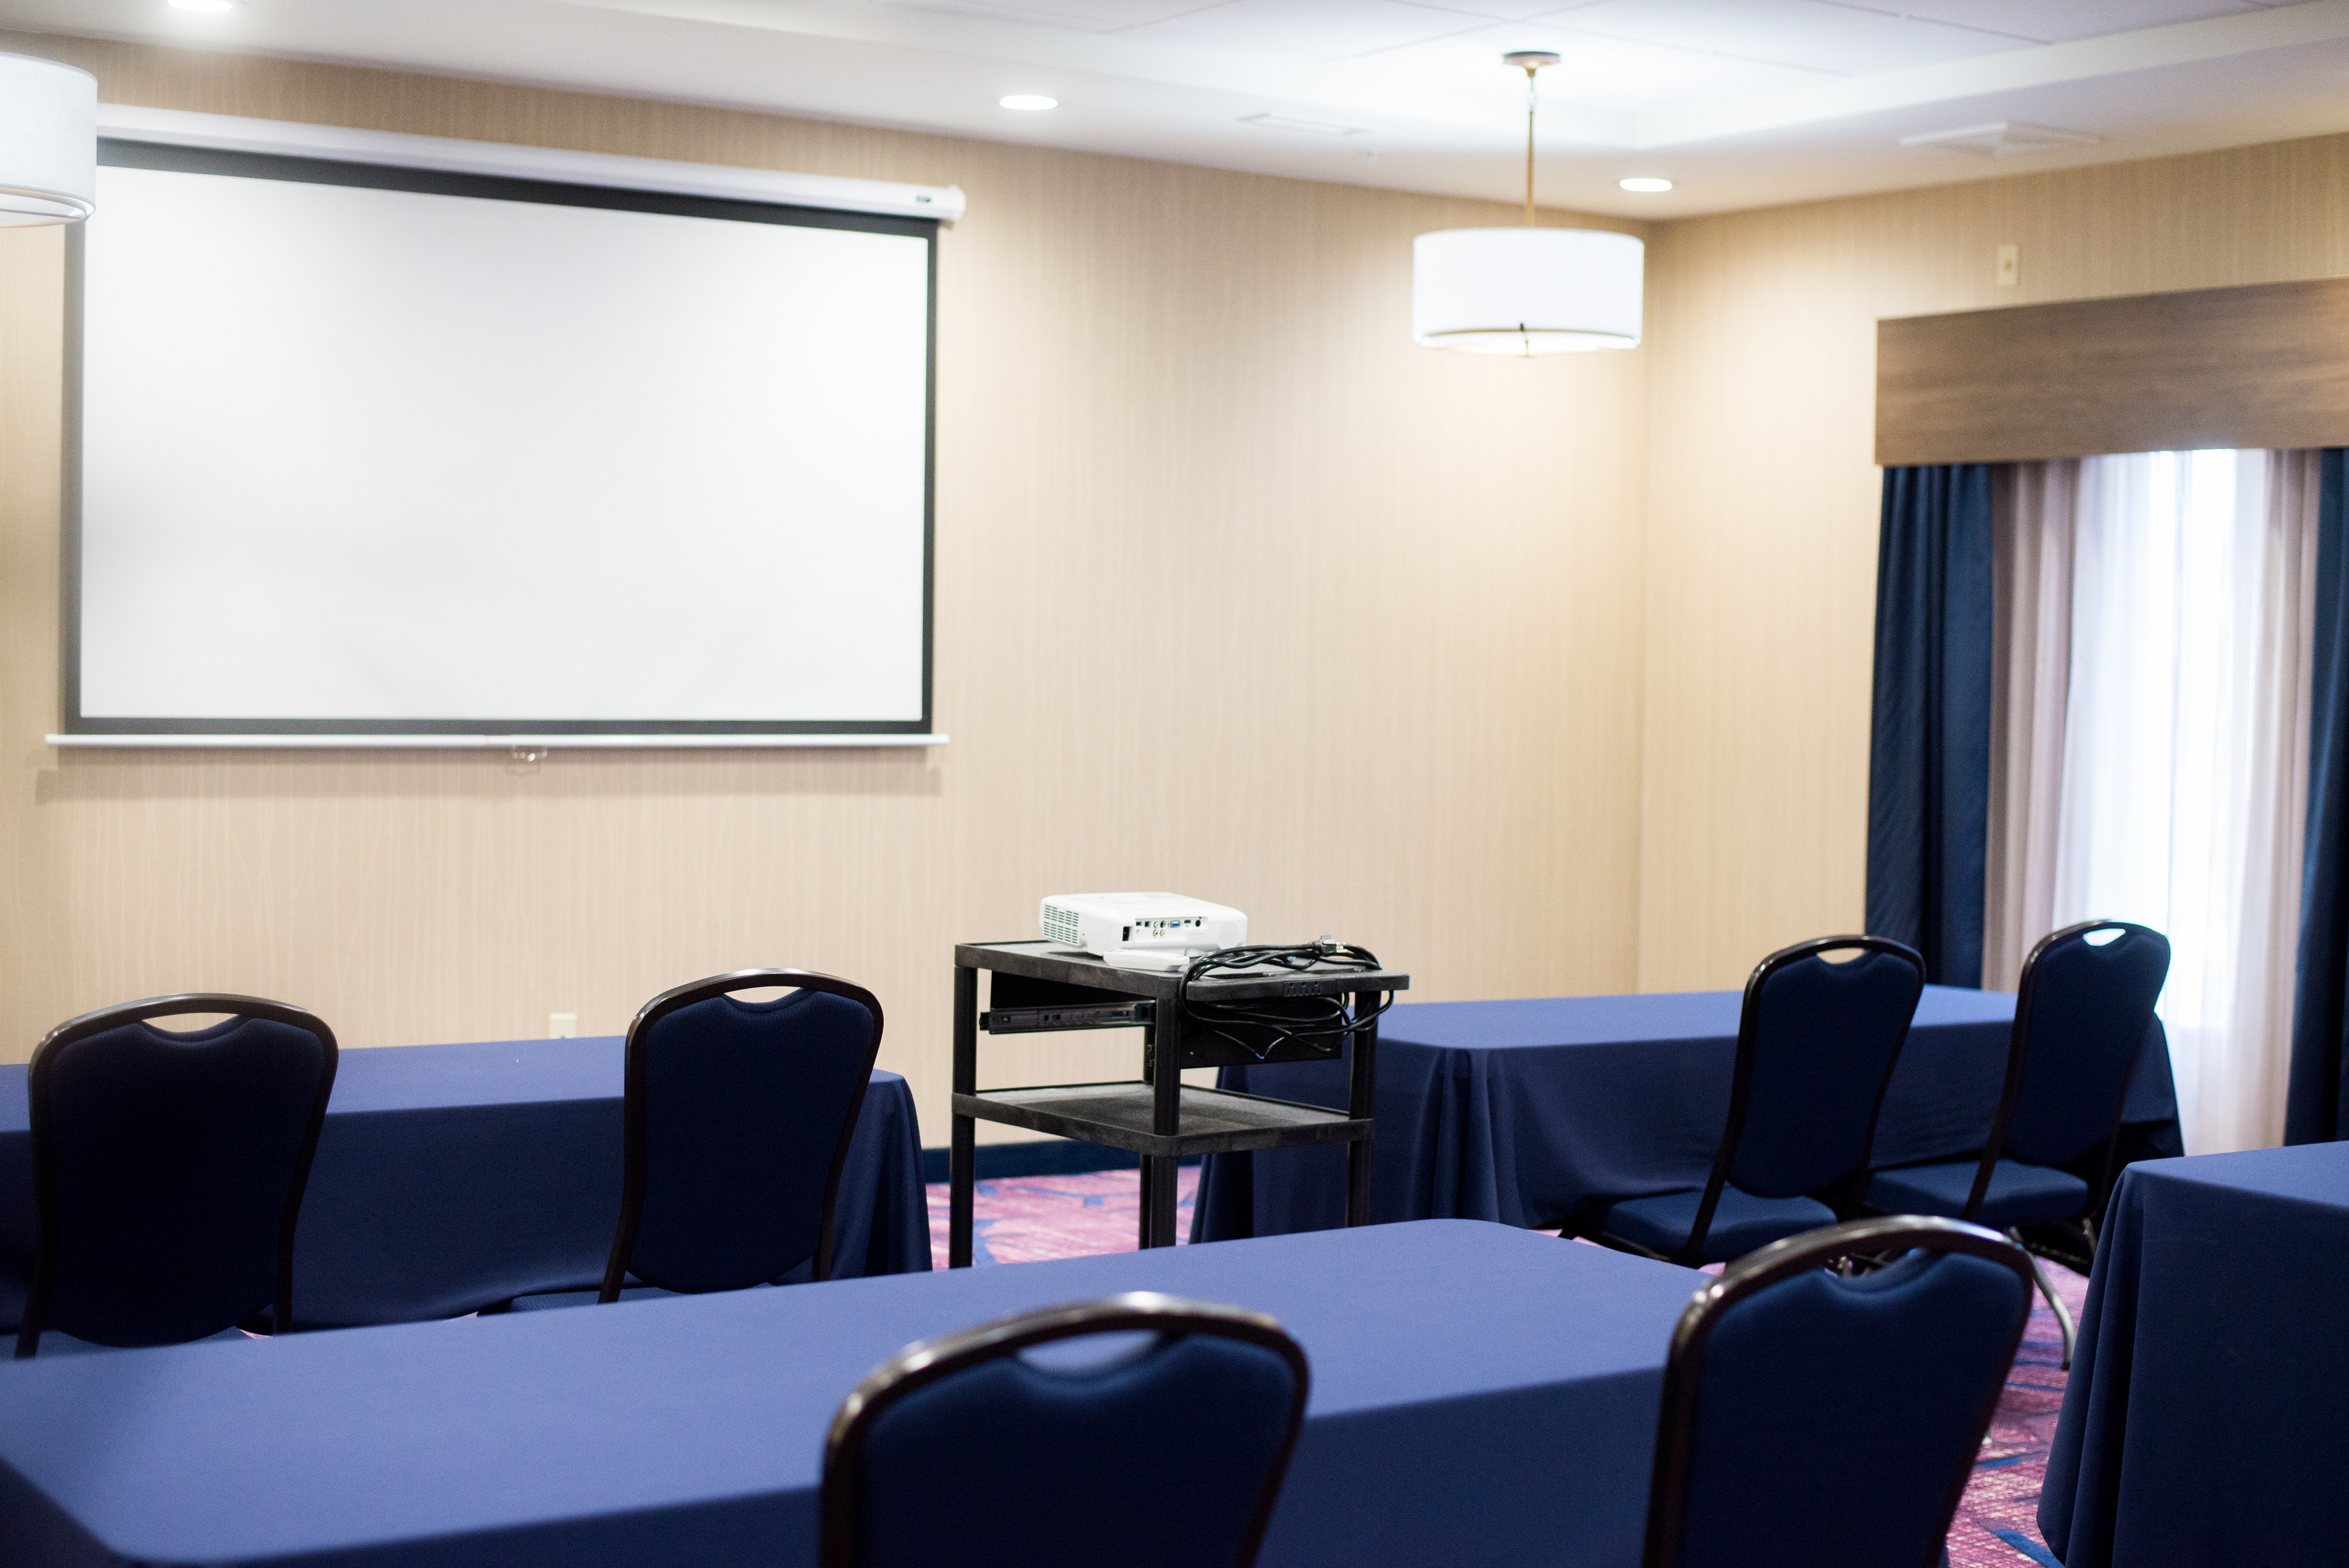 Meeting Room Classroom with Projector Screen